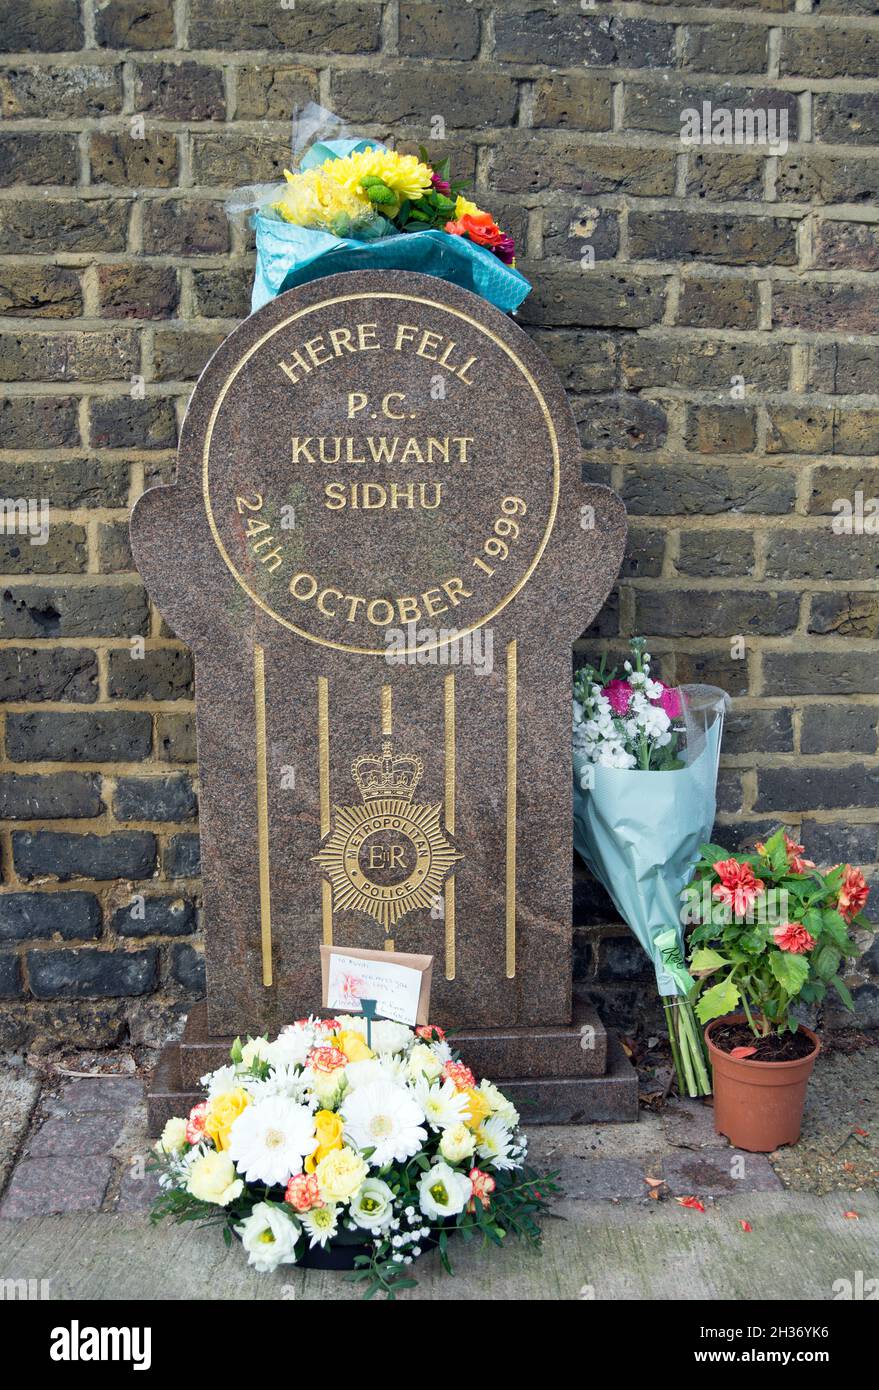 metropolitan police memorial to police constable kulwant sidhu, who died in the line of duty on 24 october 1999, in twickenham, southwest london Stock Photo